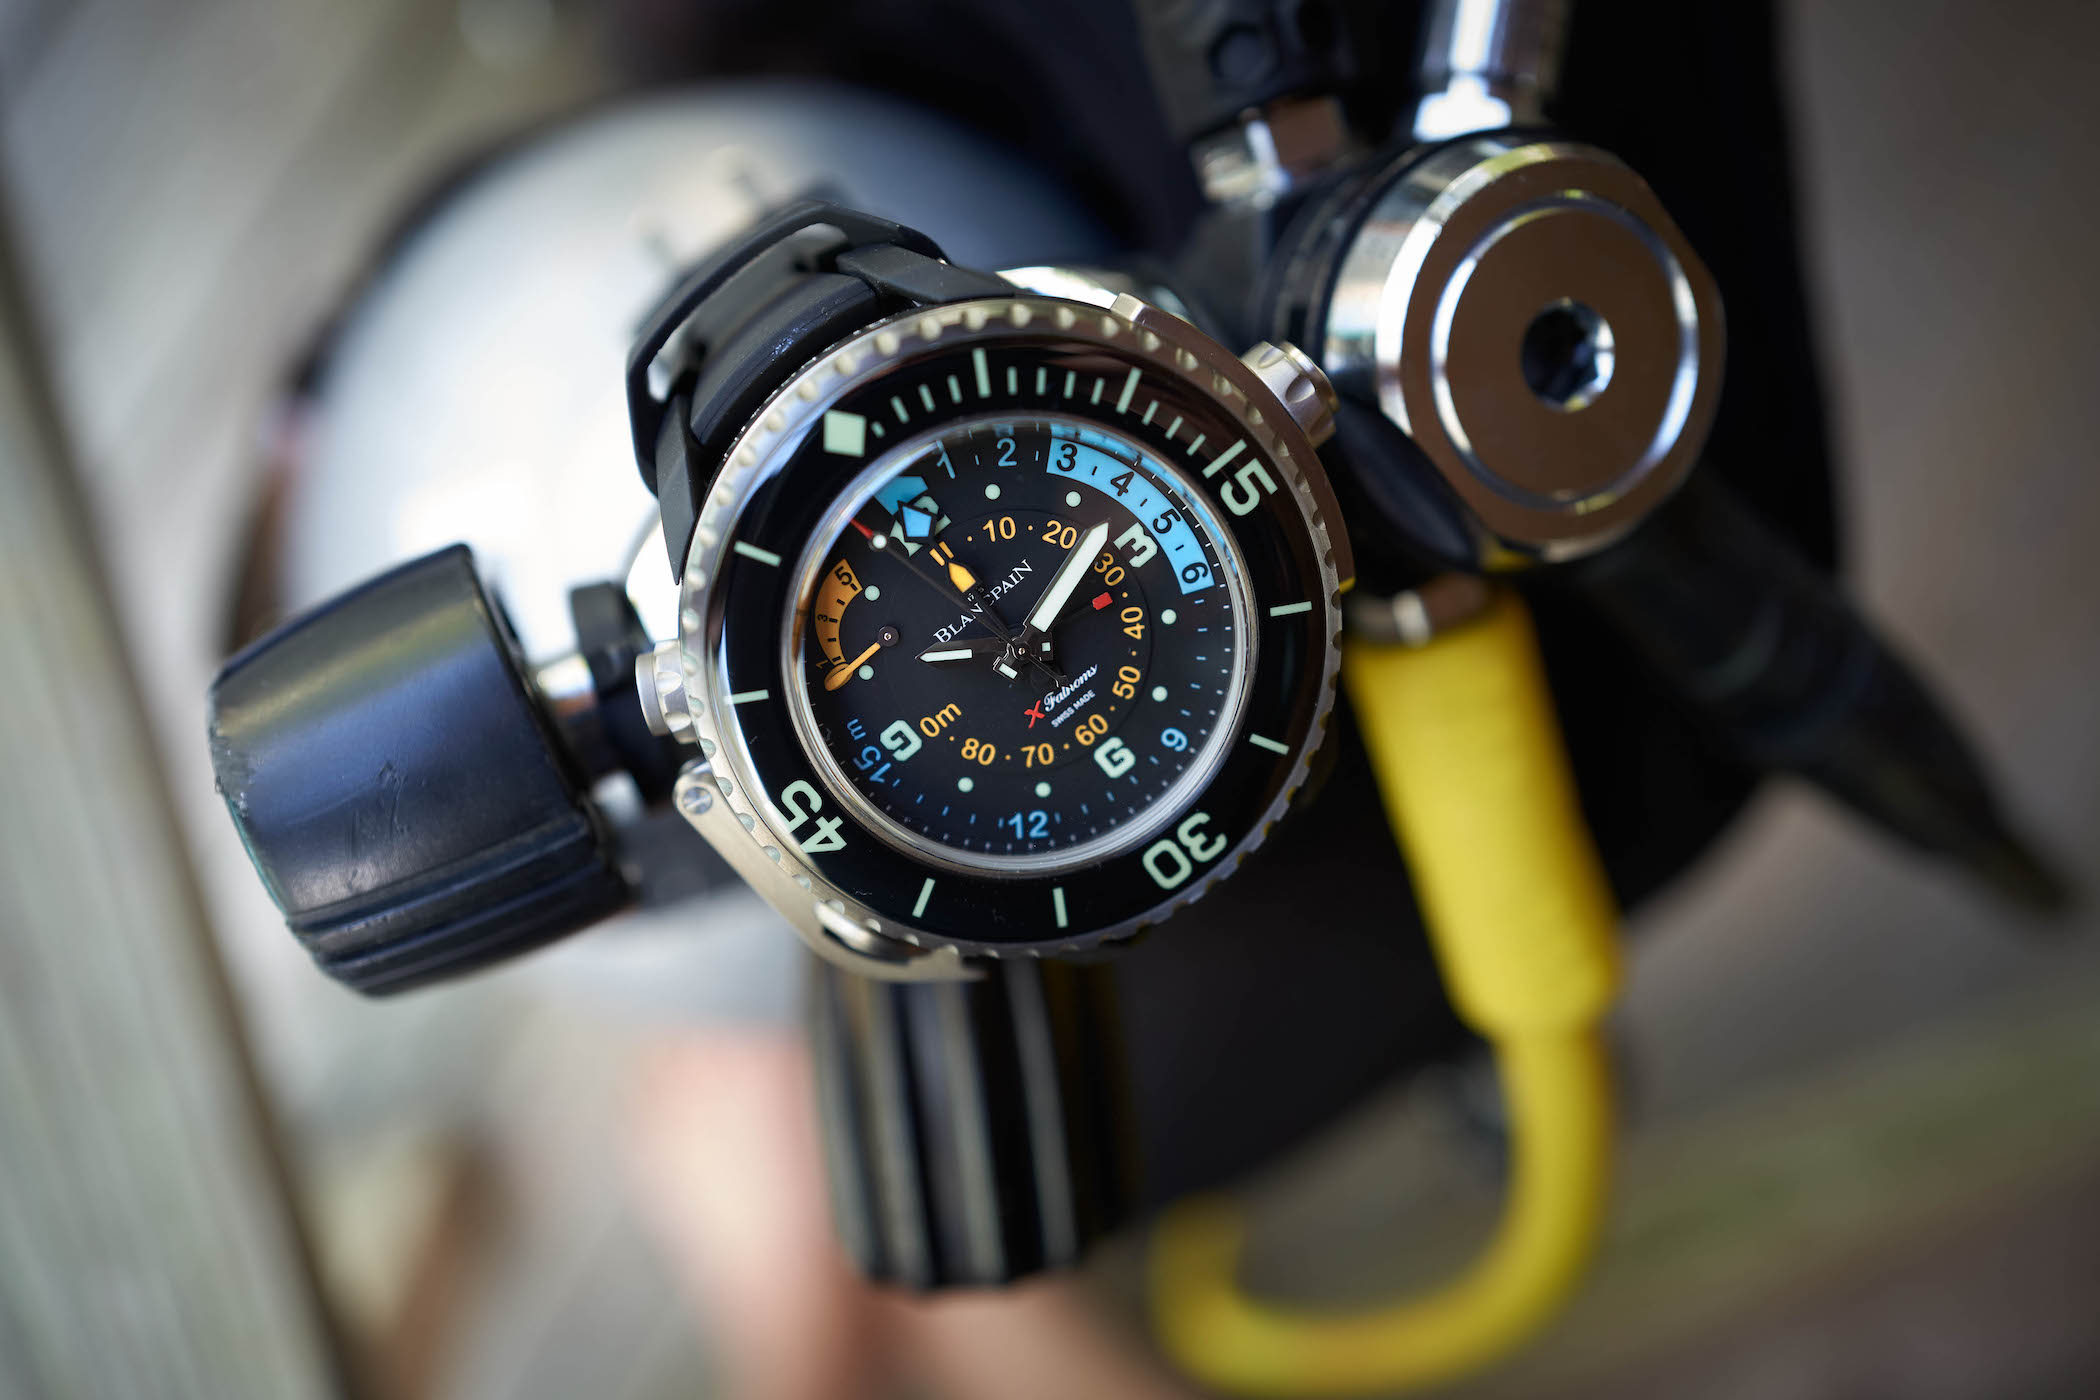 Blancpain Fifty Fathoms X Fathoms - Depth gauge Mechanical diving computer - underwater review